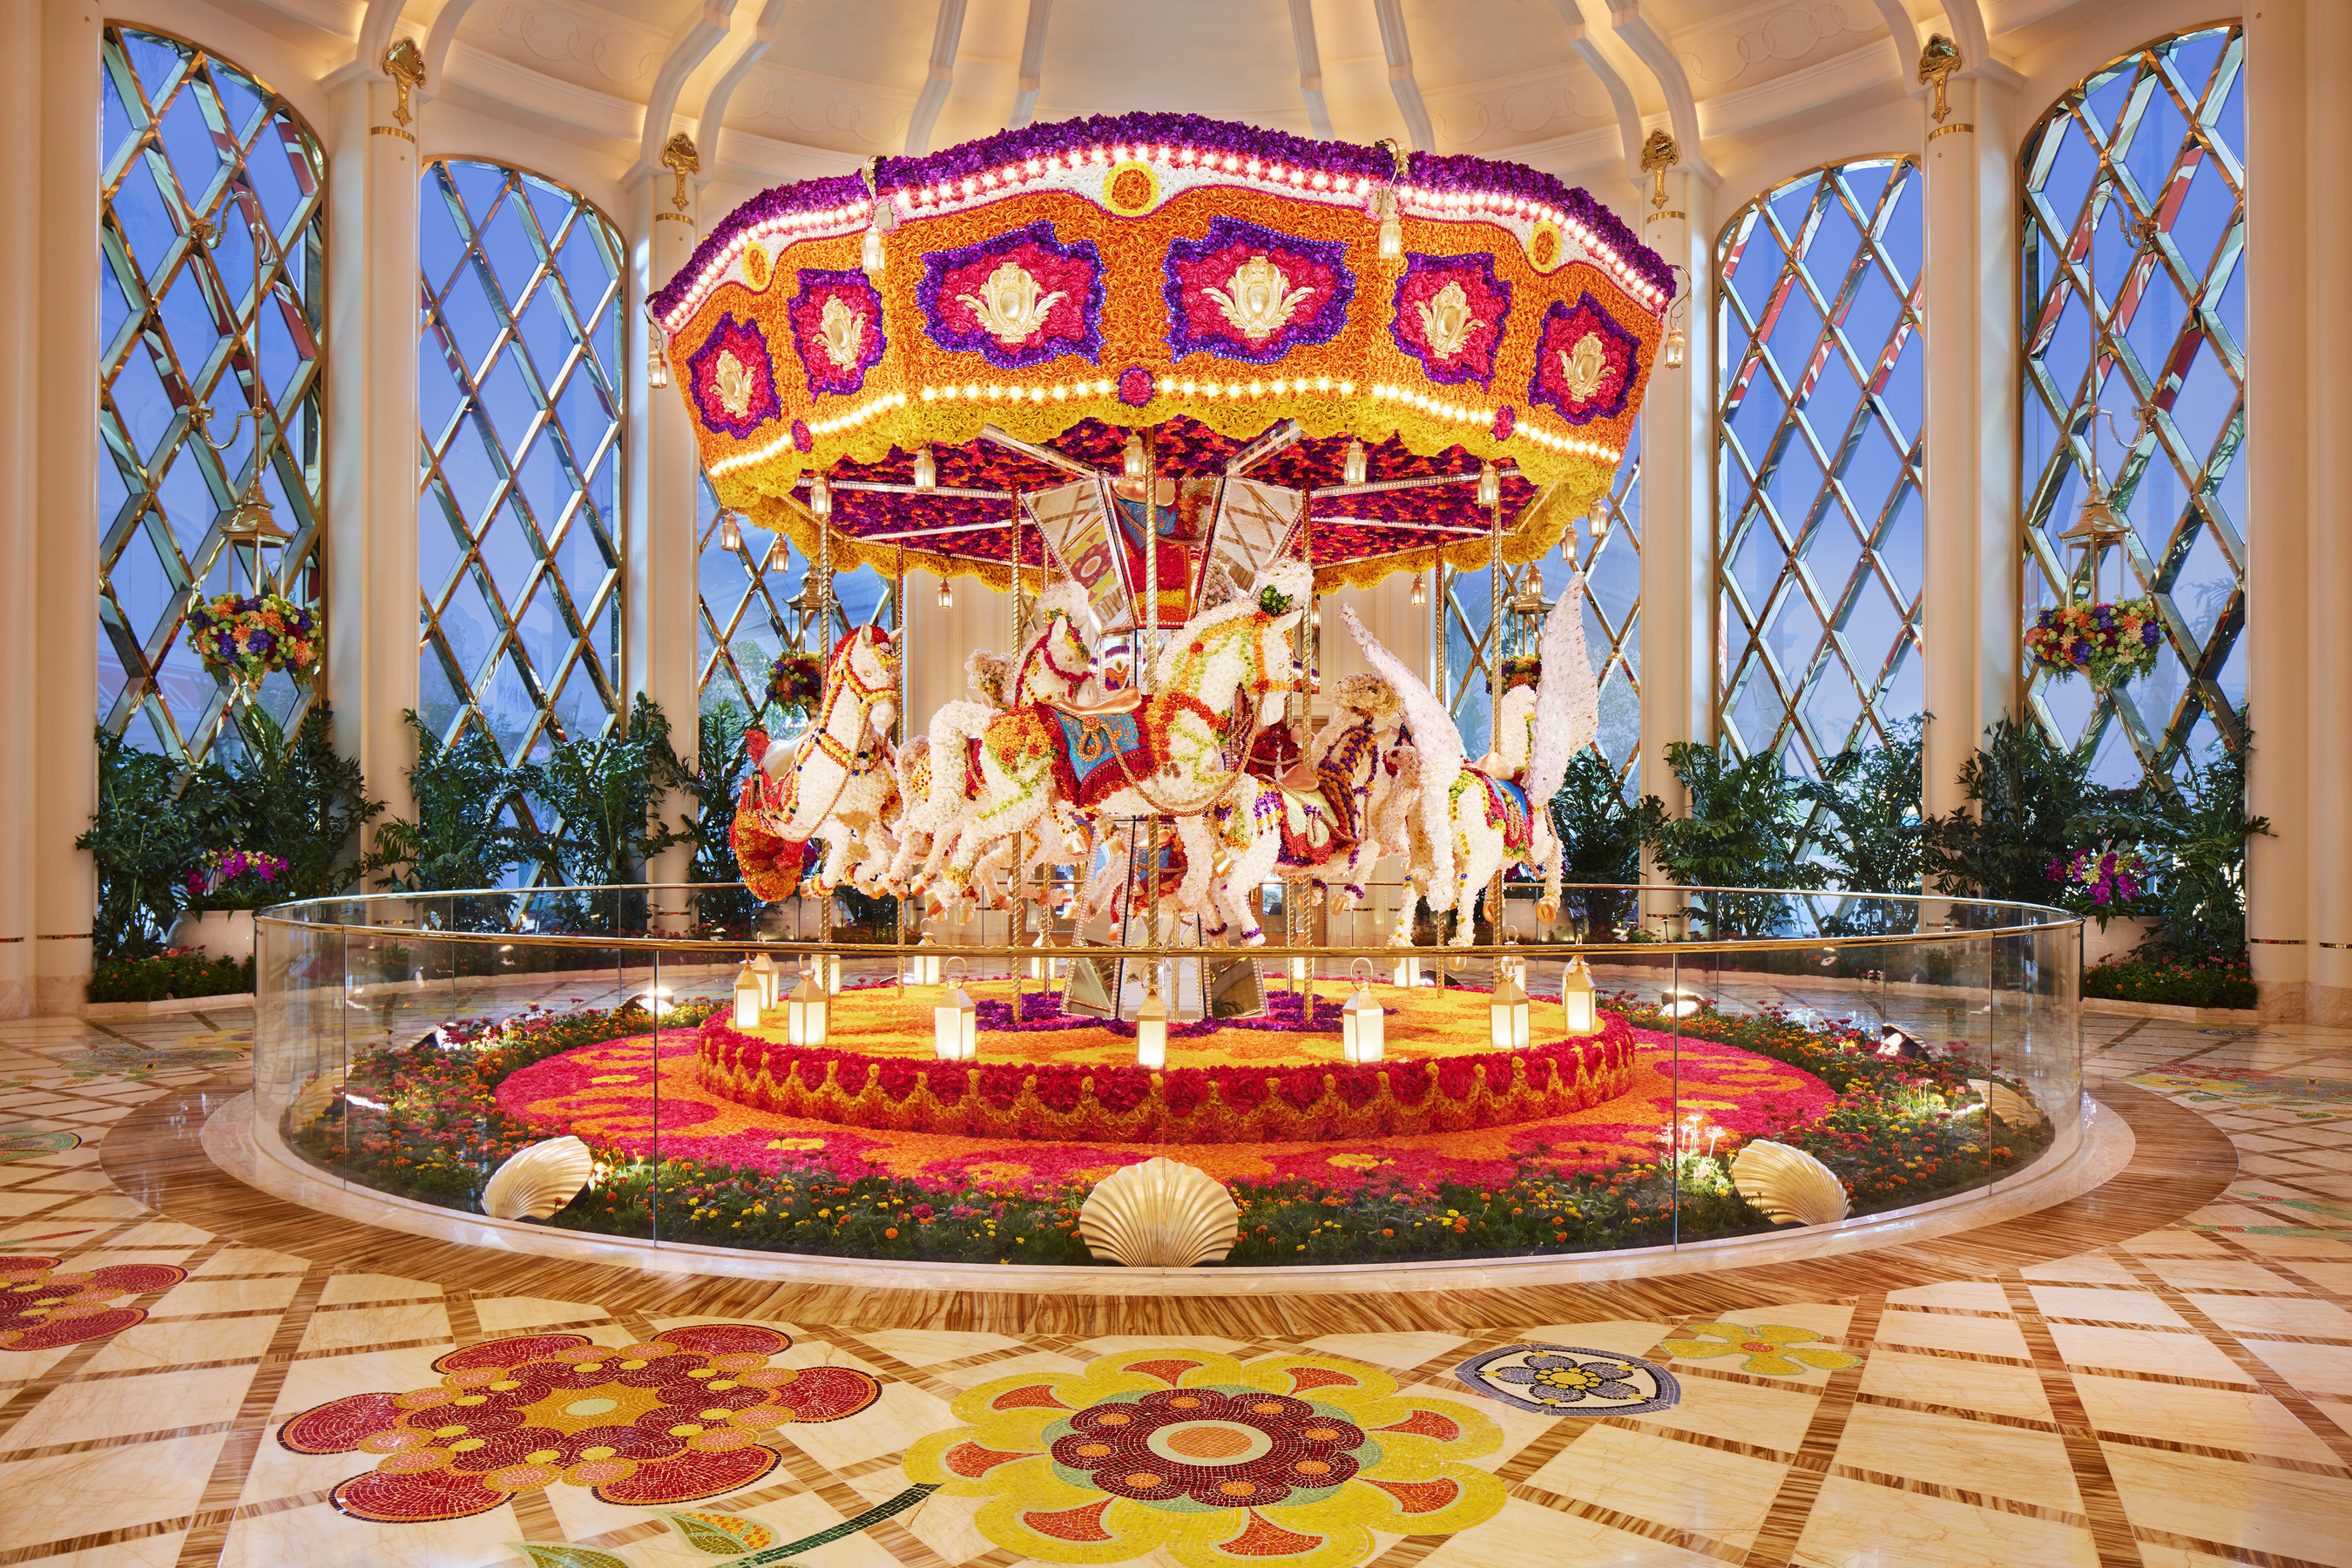 Reminiscent of childhood, this beautiful carousel is made with more than 83,000 flowers as varied as roses, peonies and others.